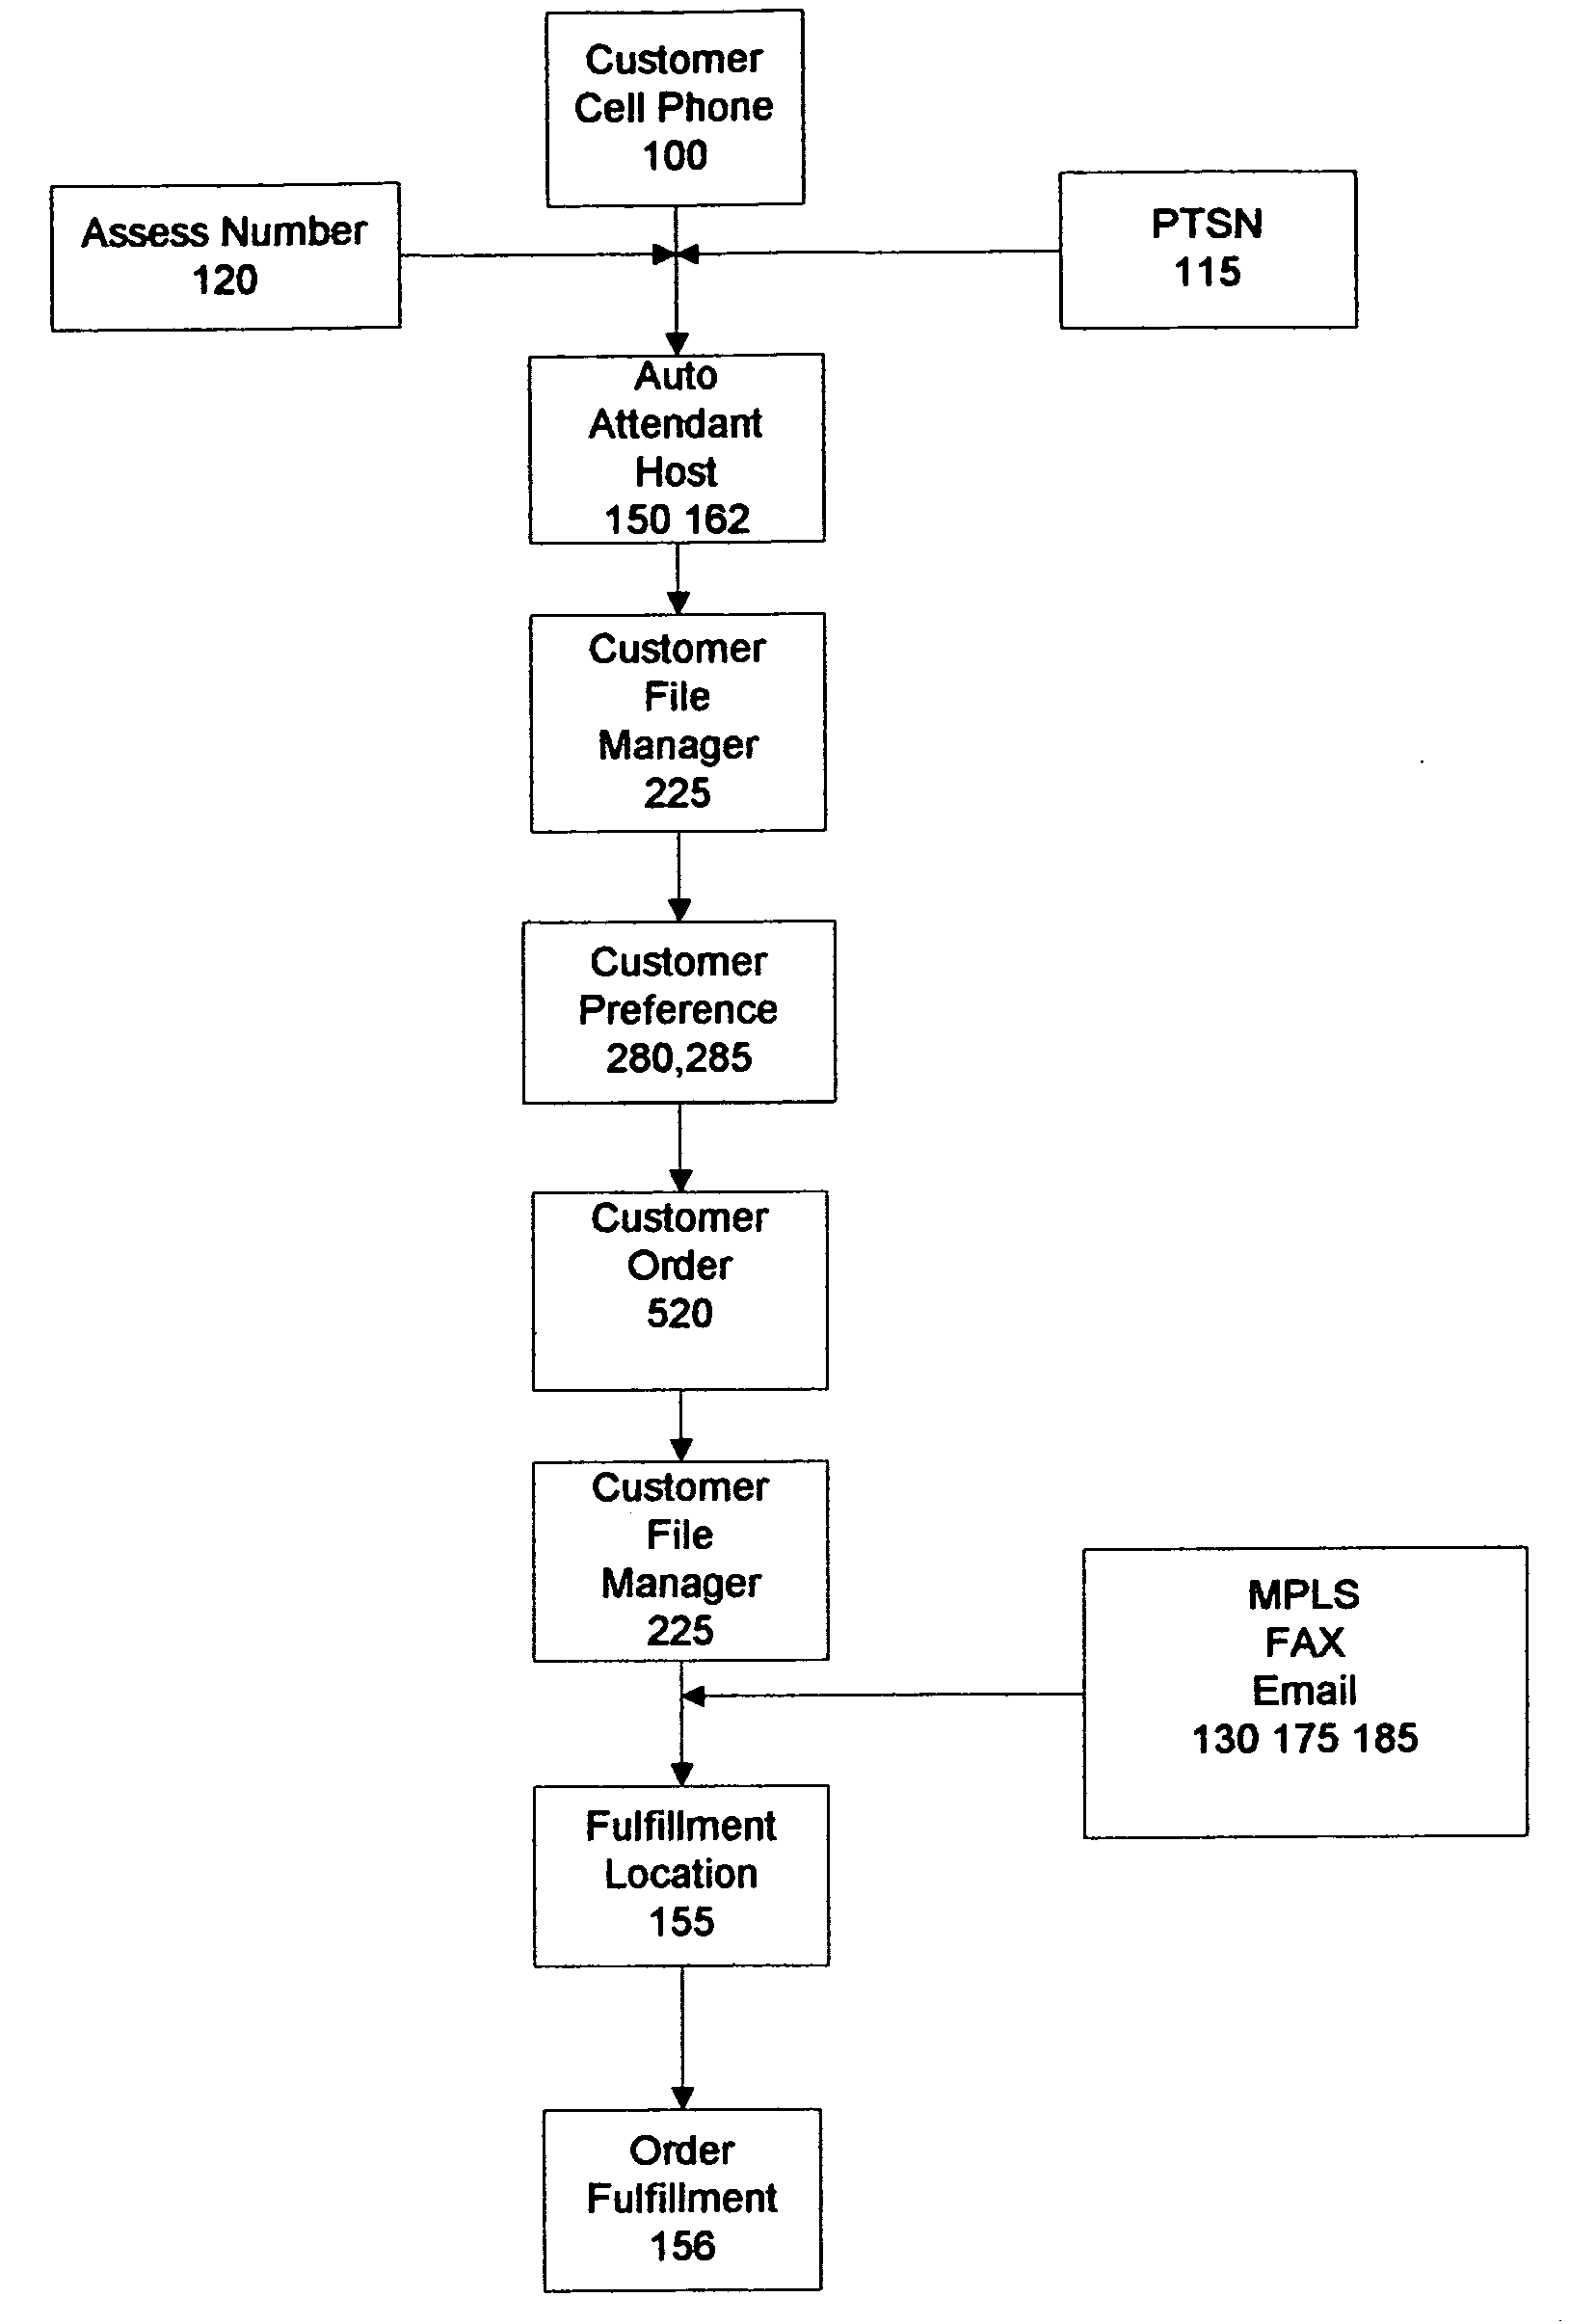 System and method providing customers with improved service using a customer telephony device connected to a preference database by an IP Network